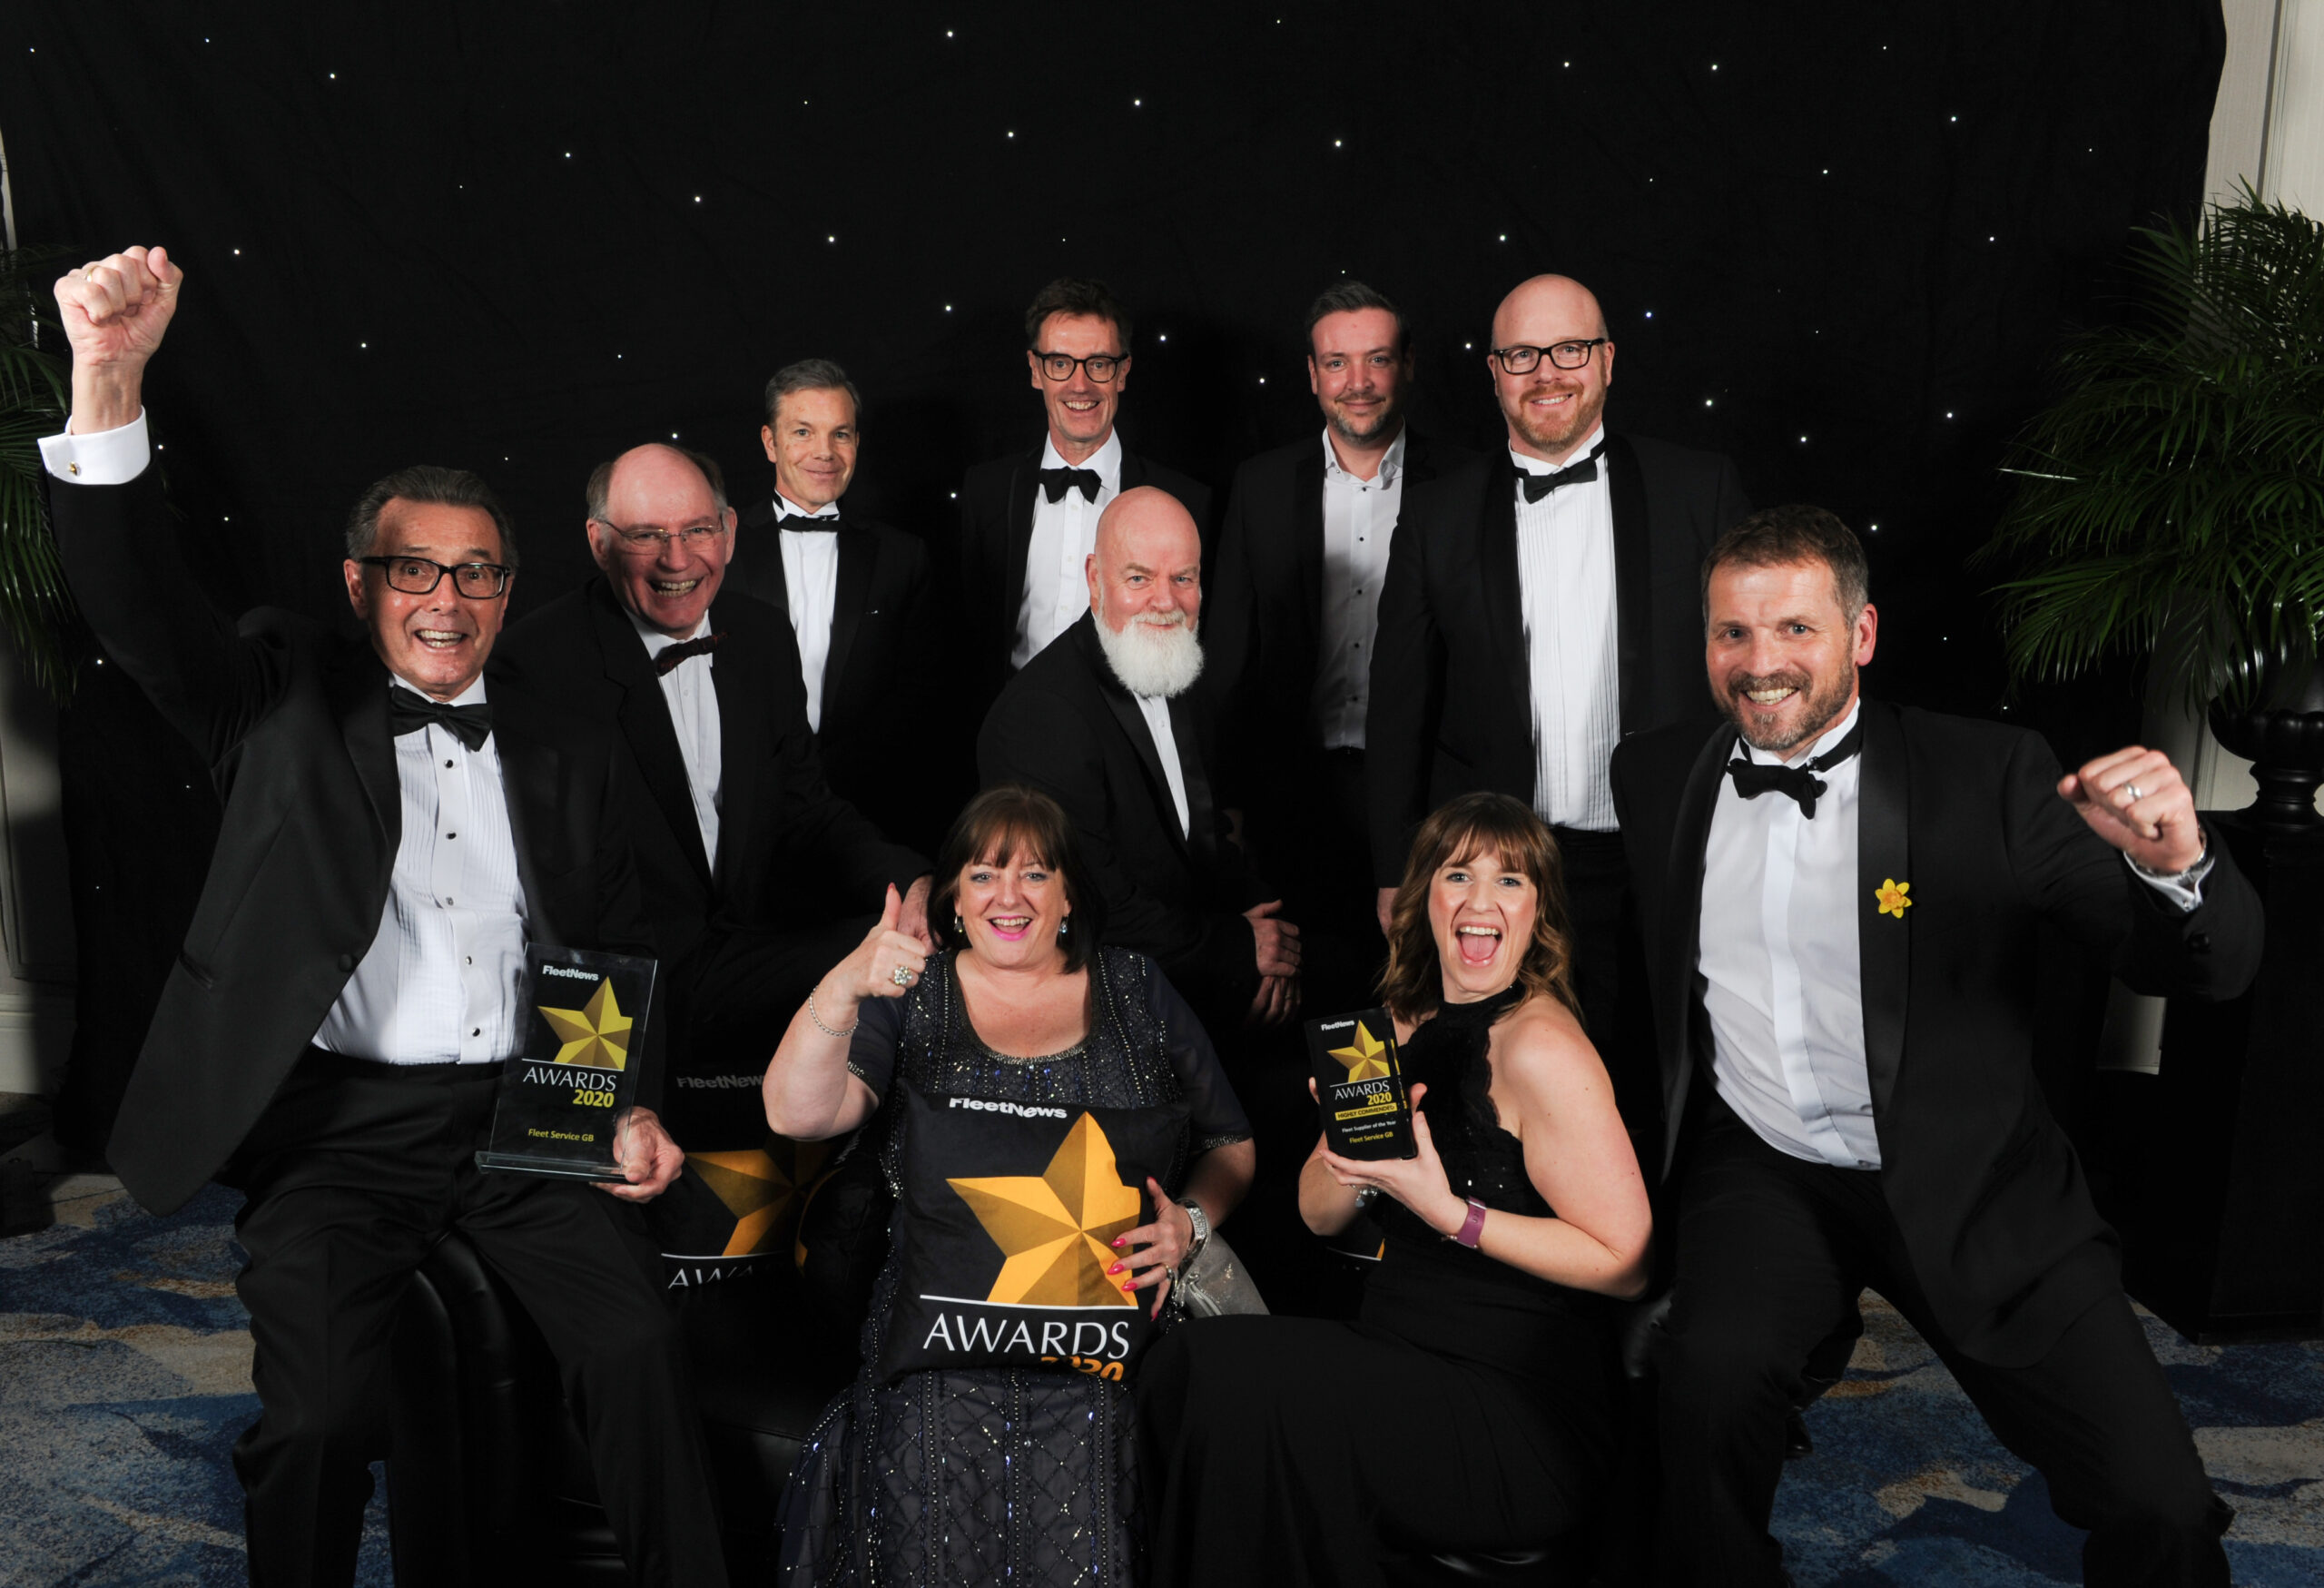 Fleet Service GB wins its first industry ‘Oscar’ for customer service excellence